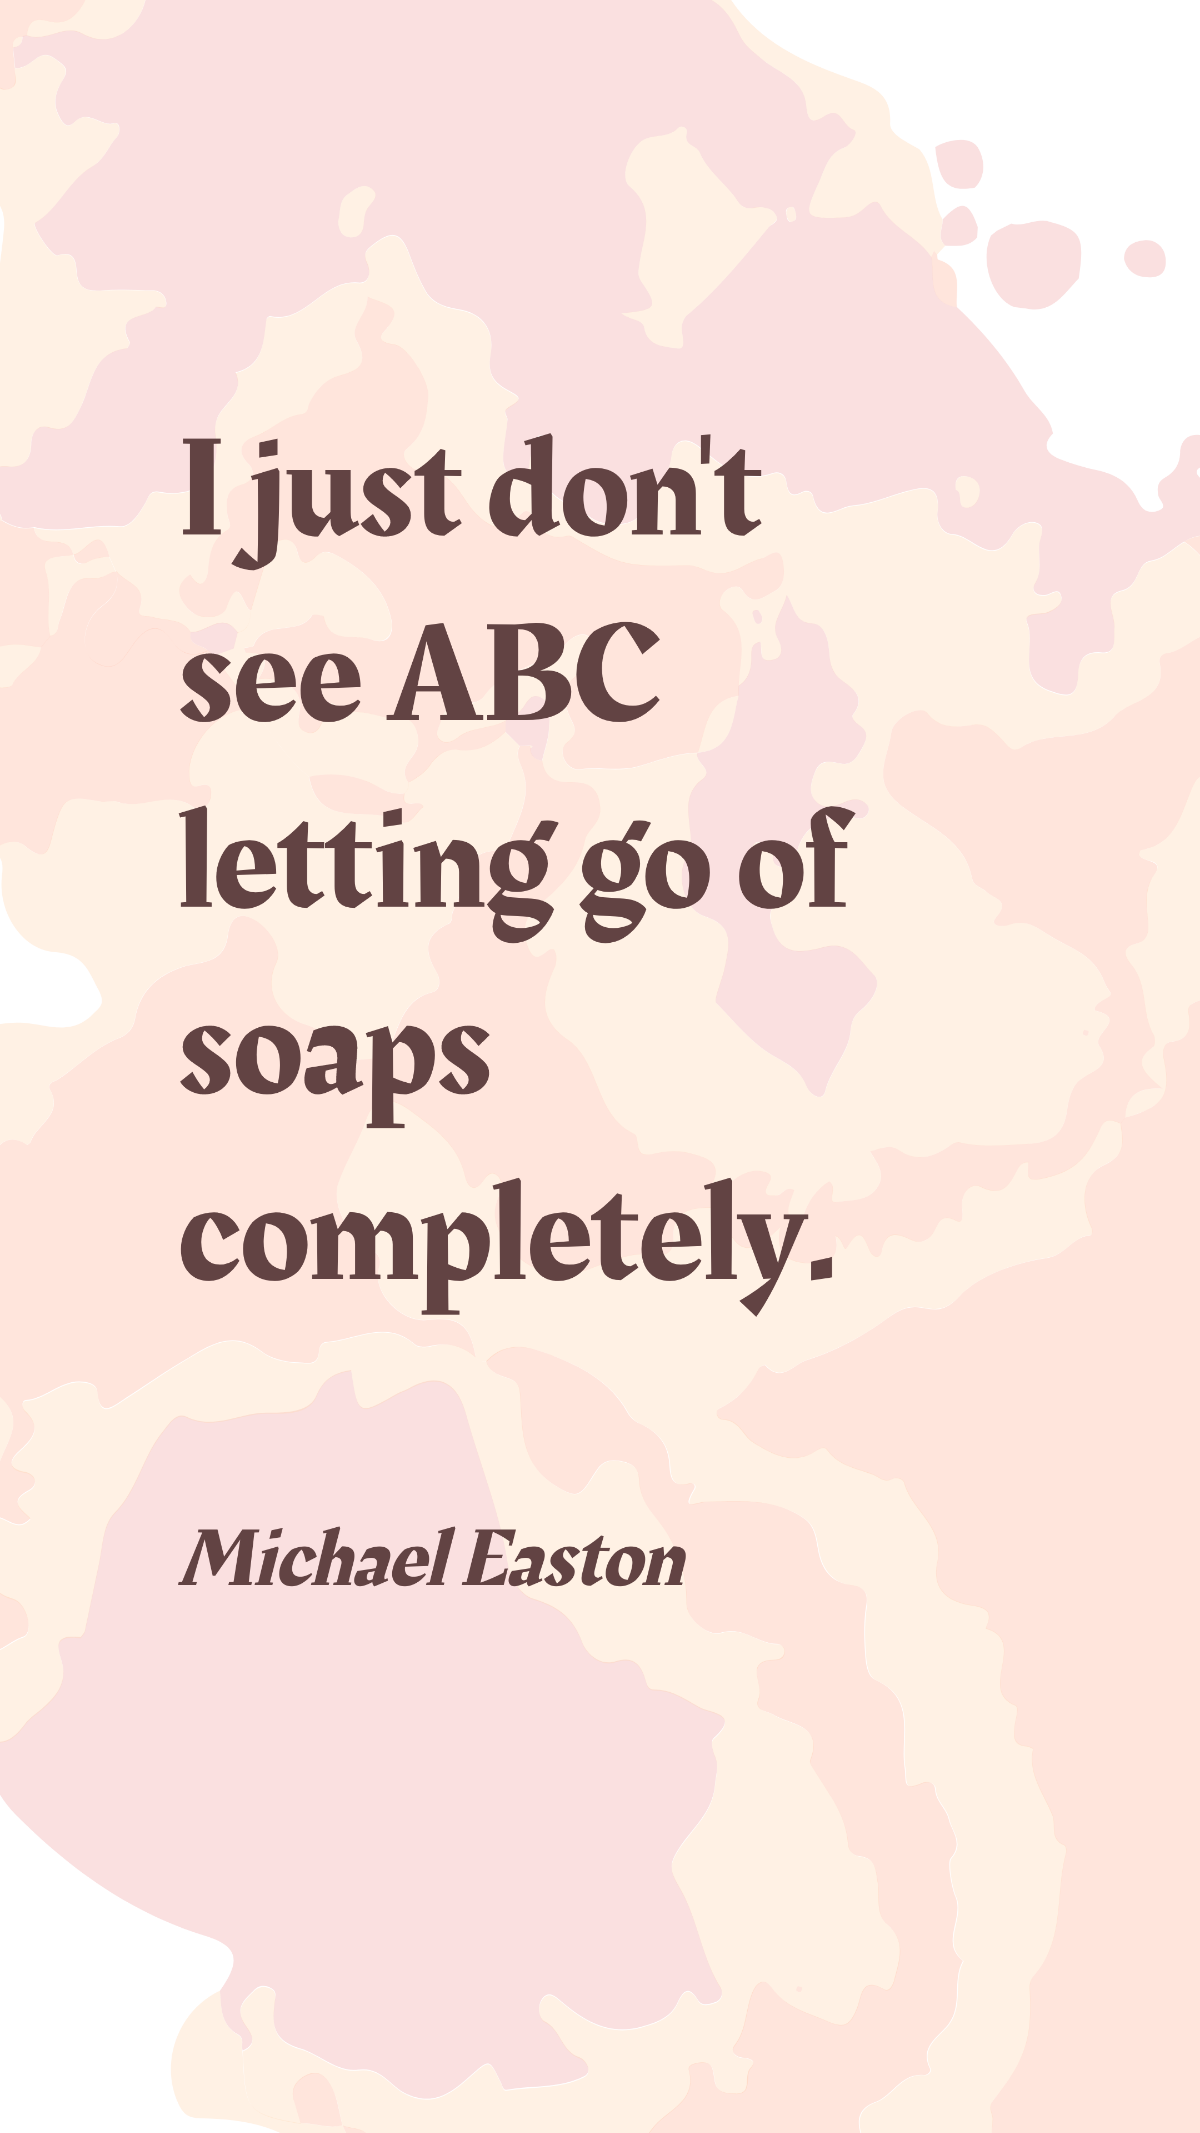 Michael Easton - I just don't see ABC letting go of soaps completely.